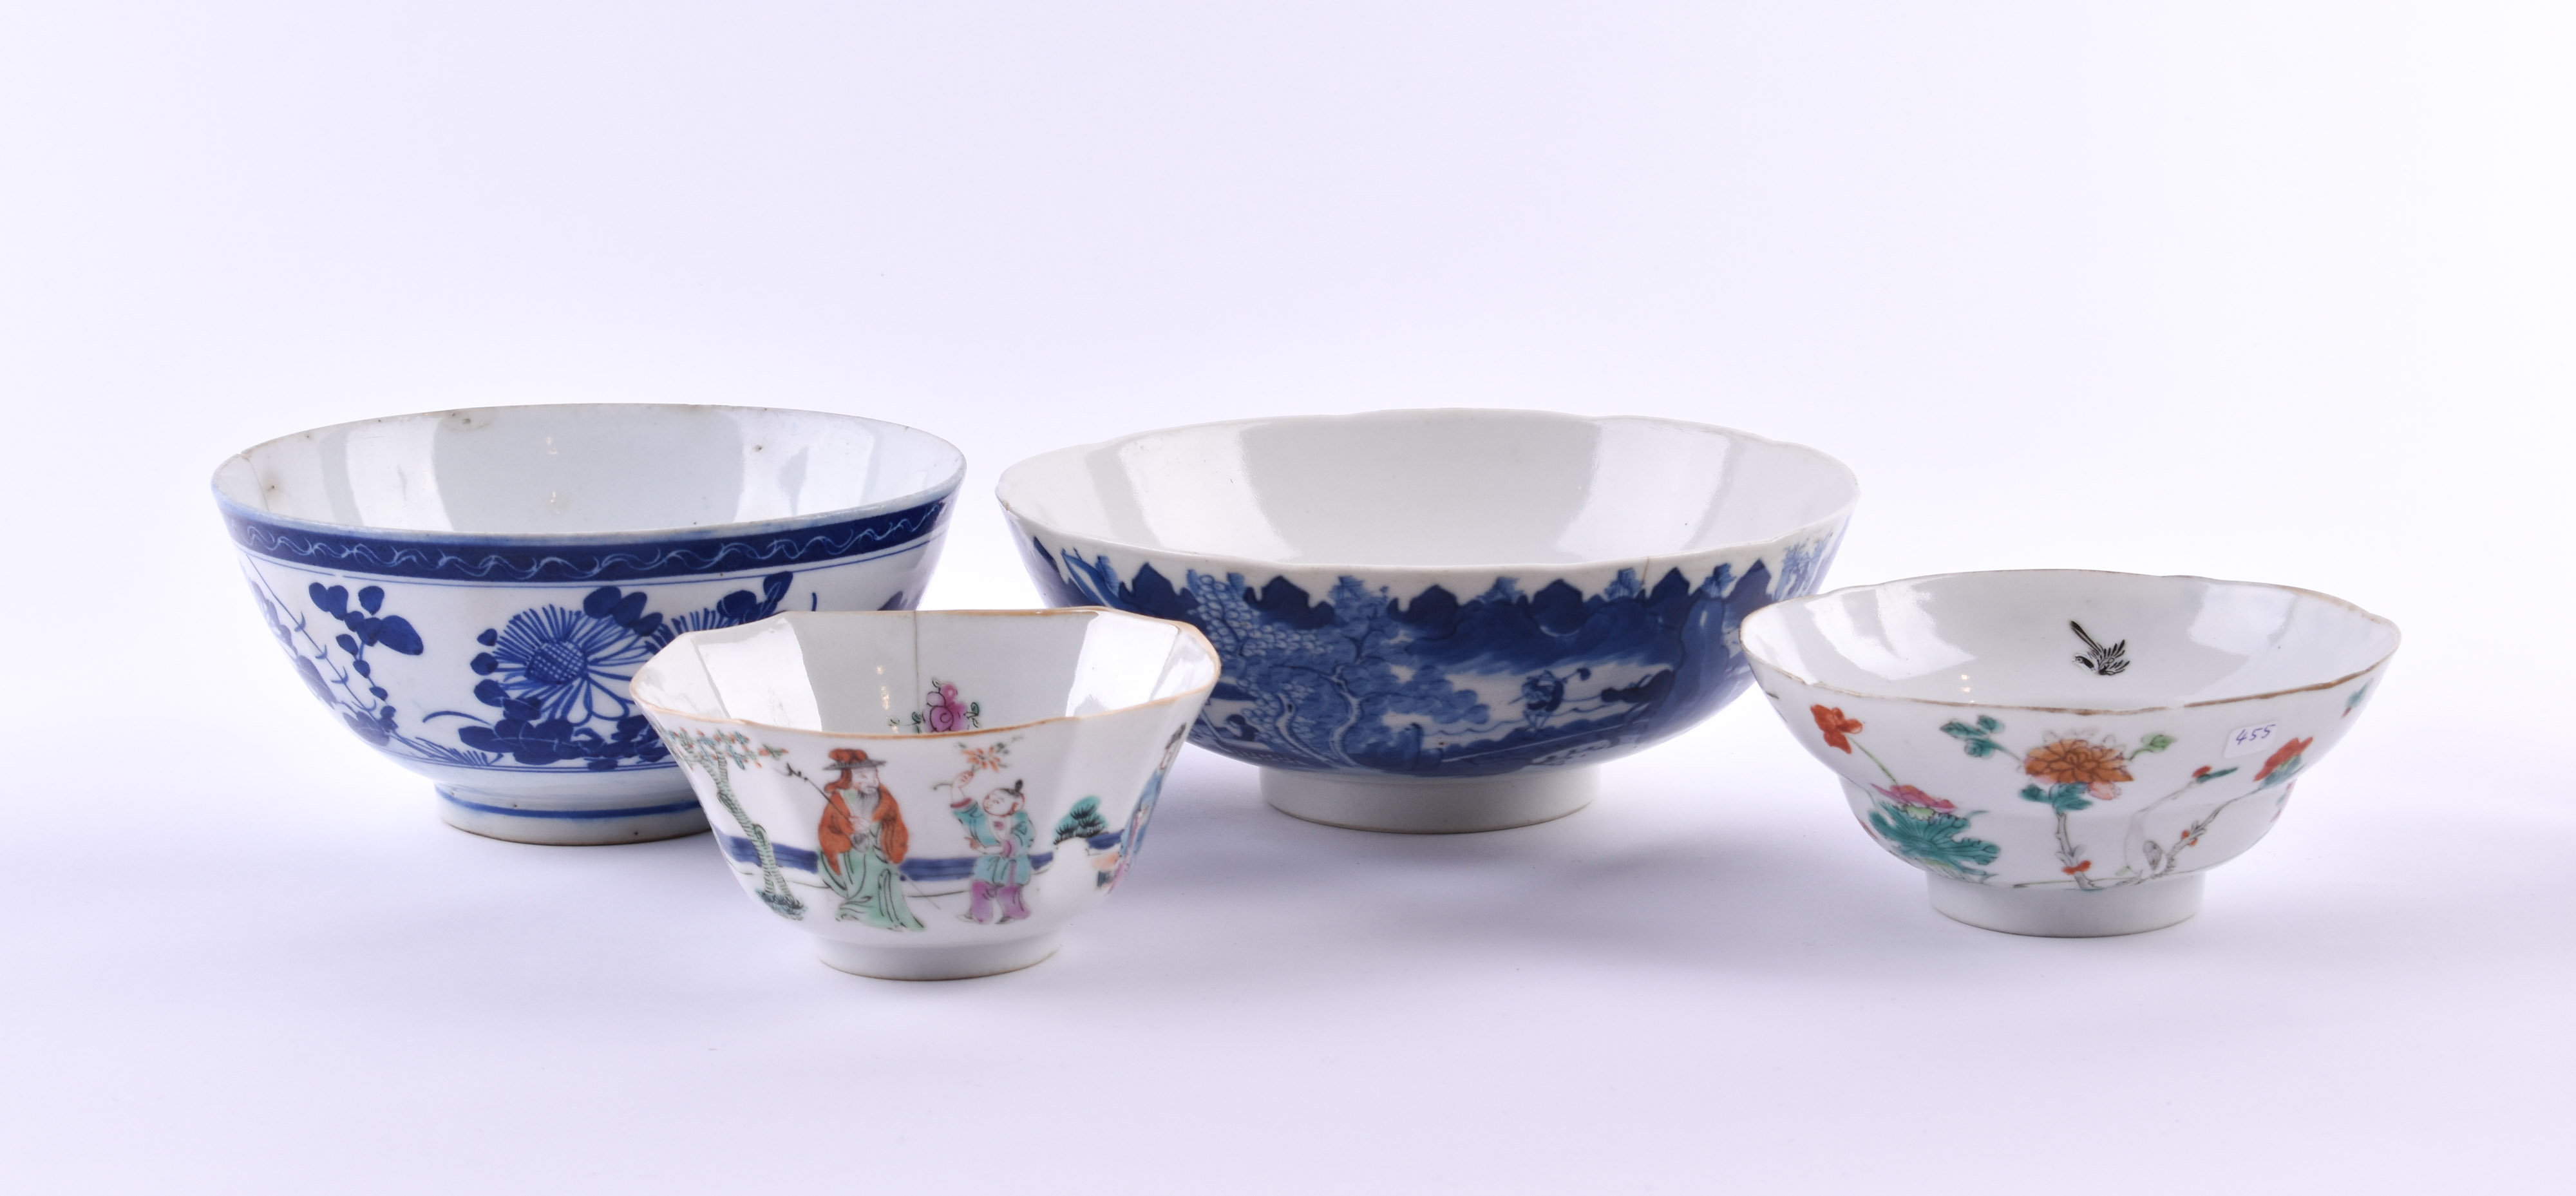  A group of Asian porcelain China Qing dynasty - Image 2 of 12